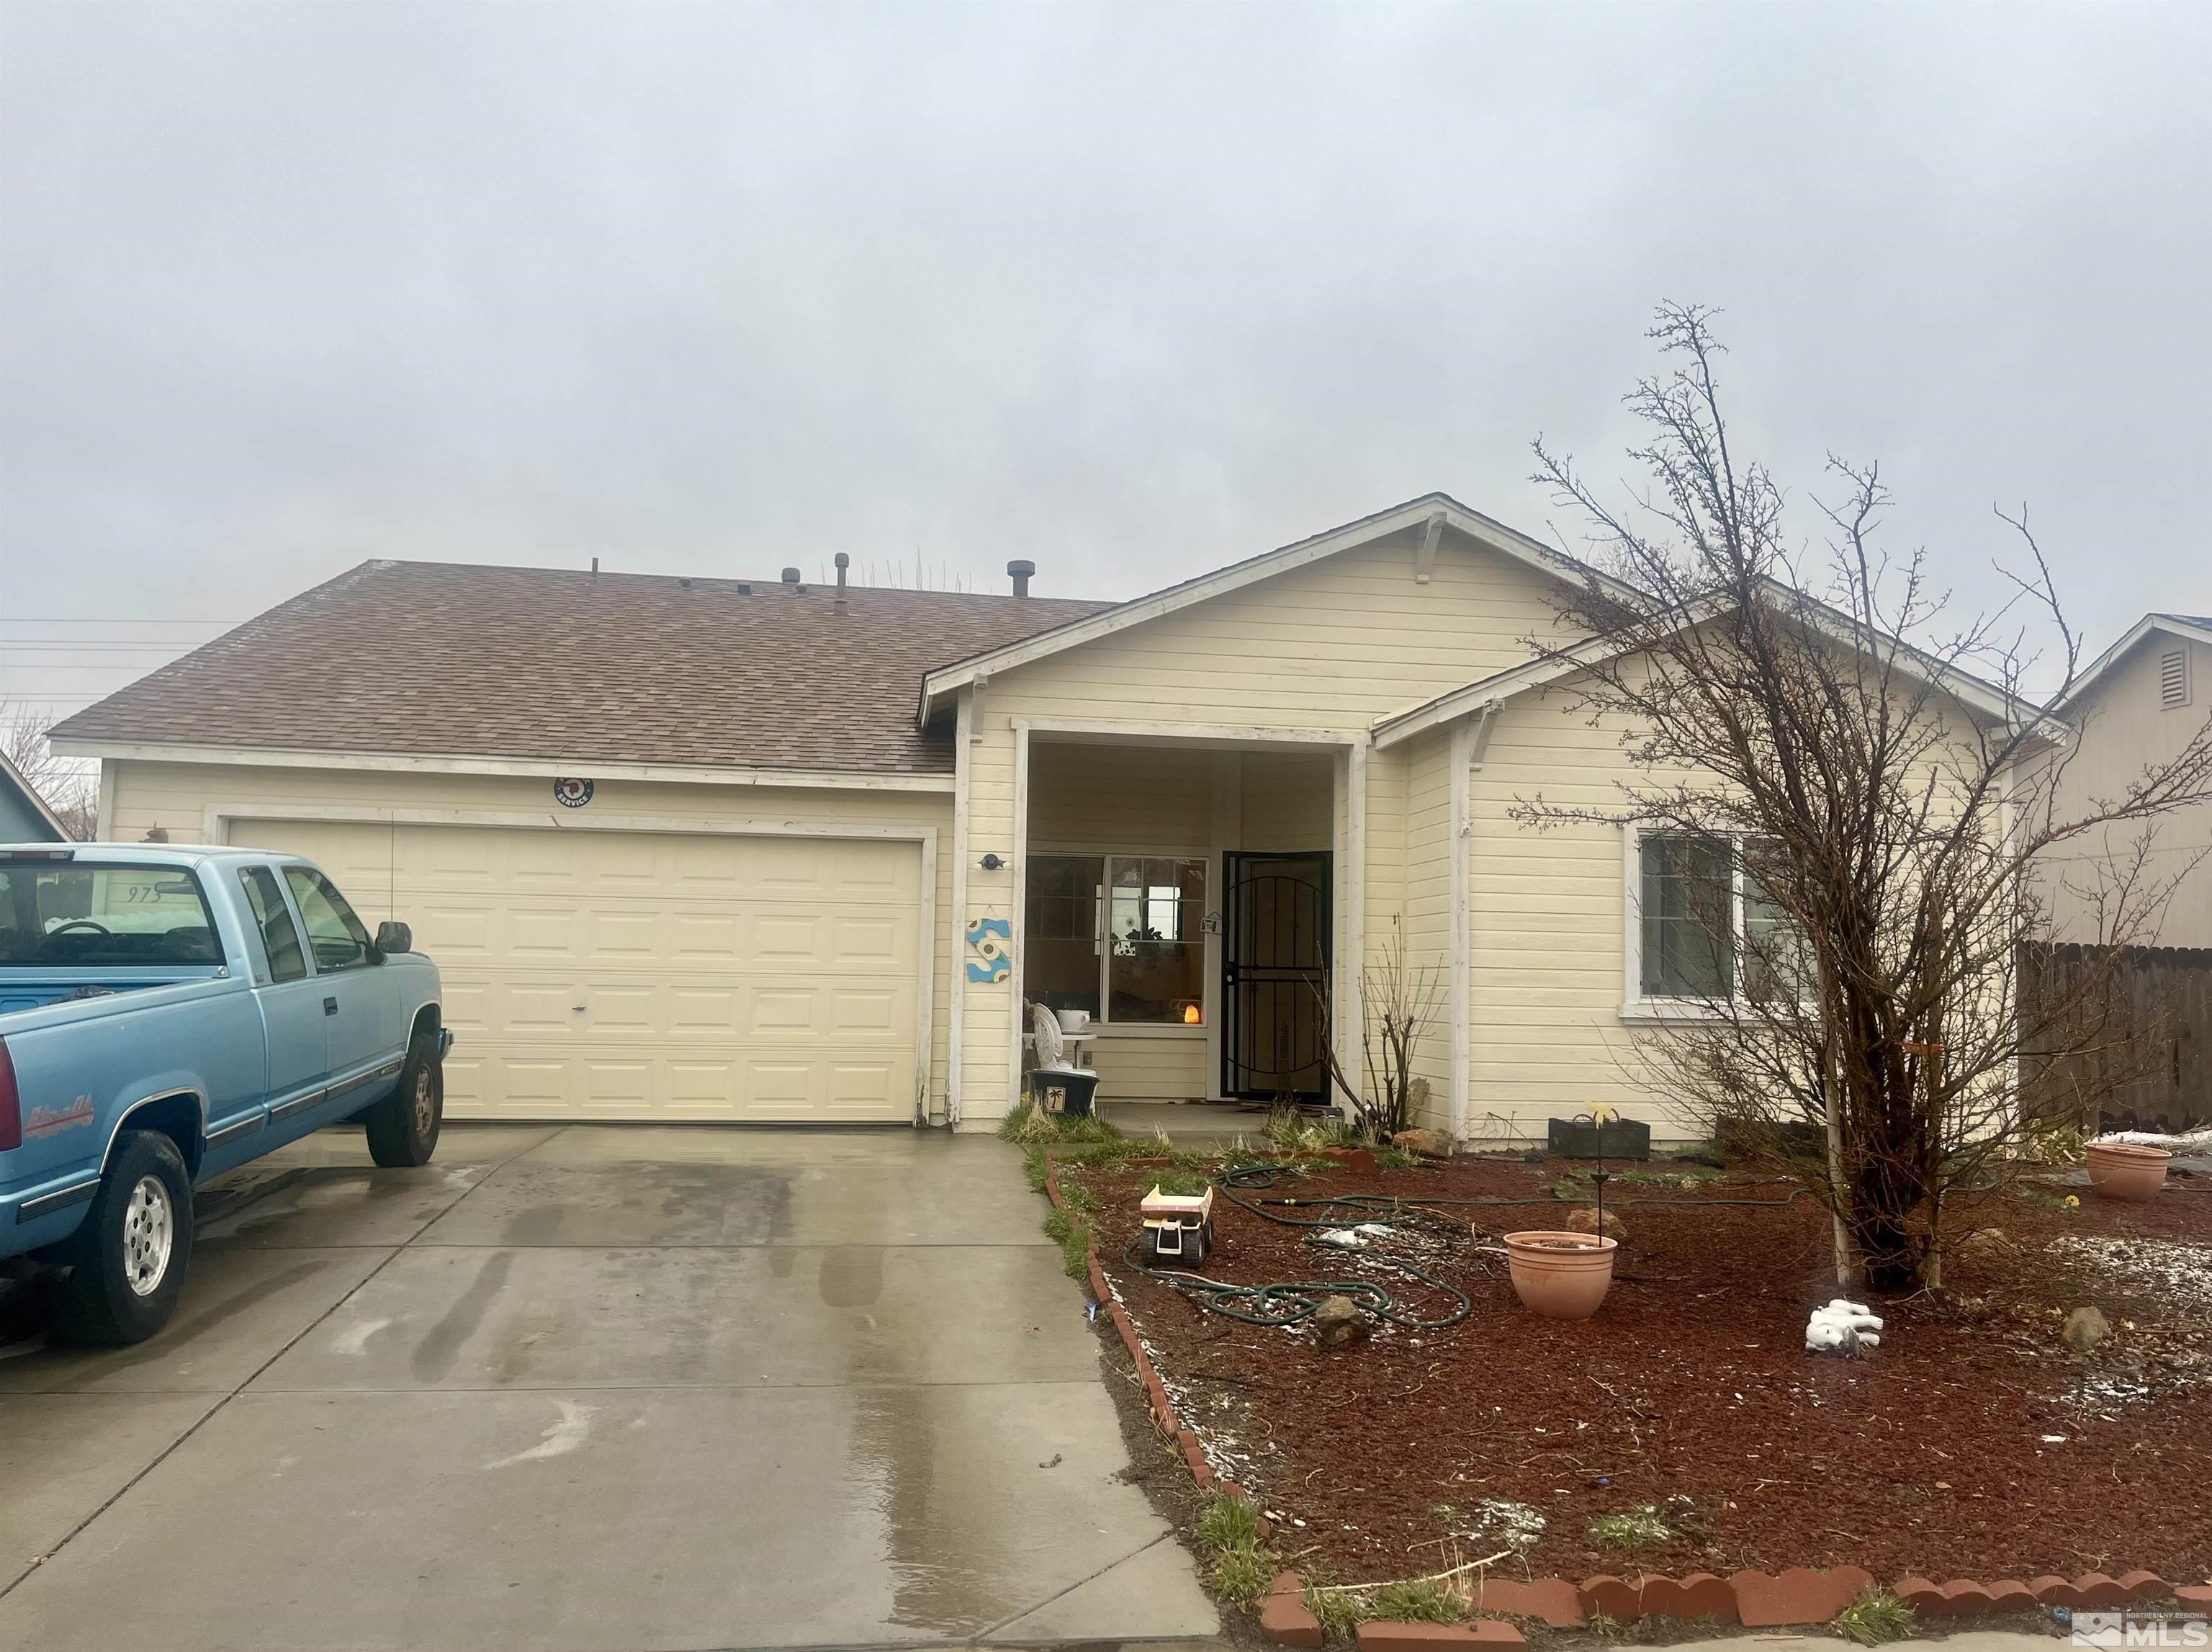 973 Coldwater Dr., Fernley NV 89408